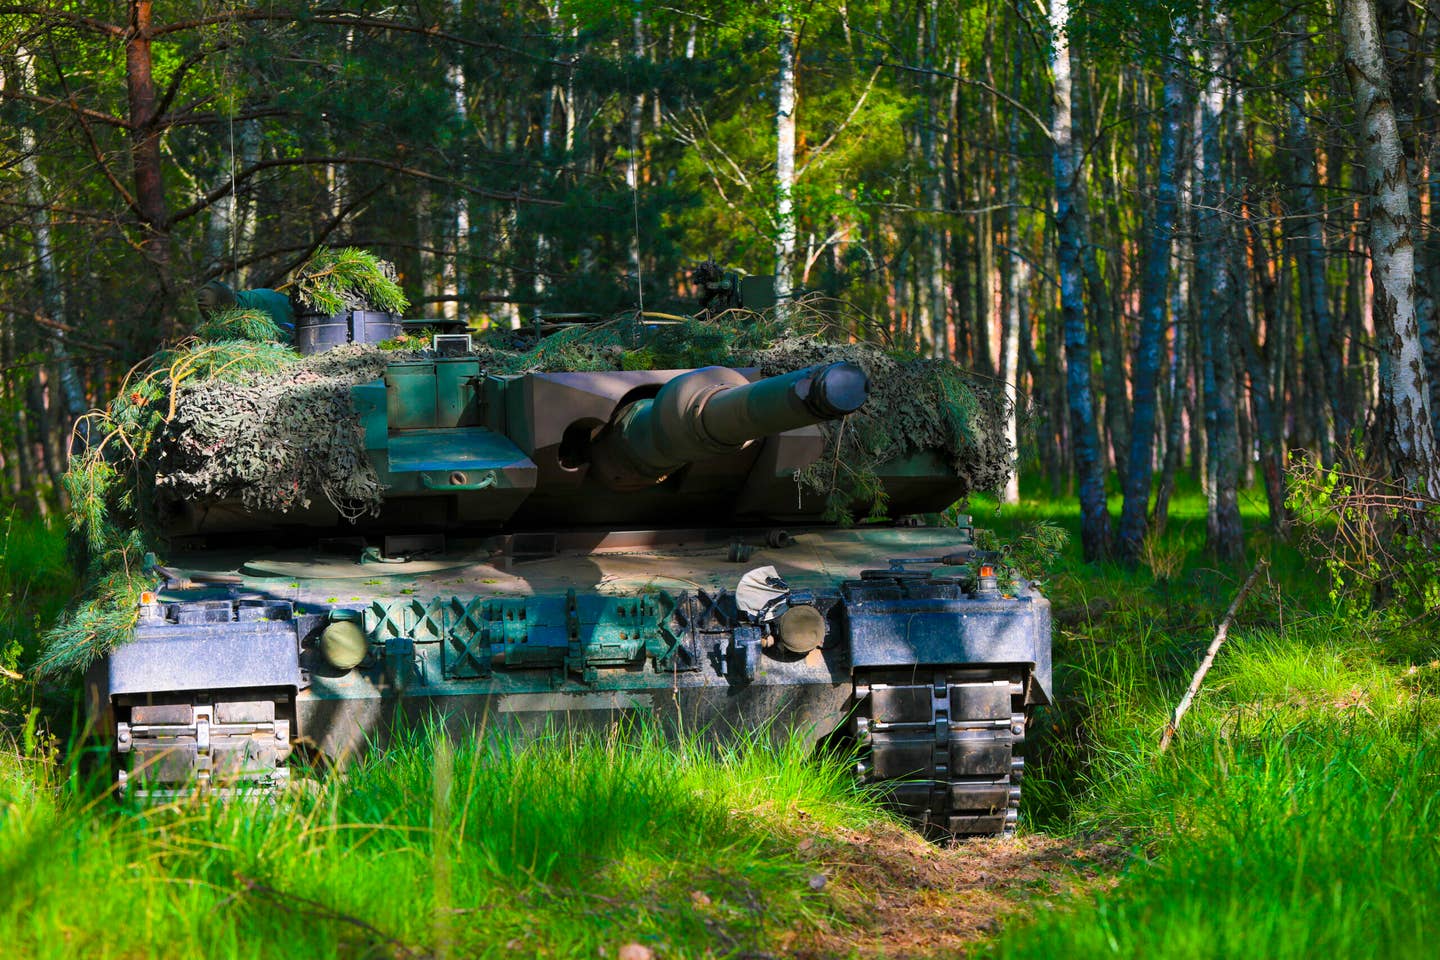 A Polish Leopard tank pulls security during their multinational field training exercise as part of Defender Europe 2022, Drawsko Pomorskie, Poland, May 15, 2022. <em>U.S. Army photo by Sgt. Andrew Greenwood</em>